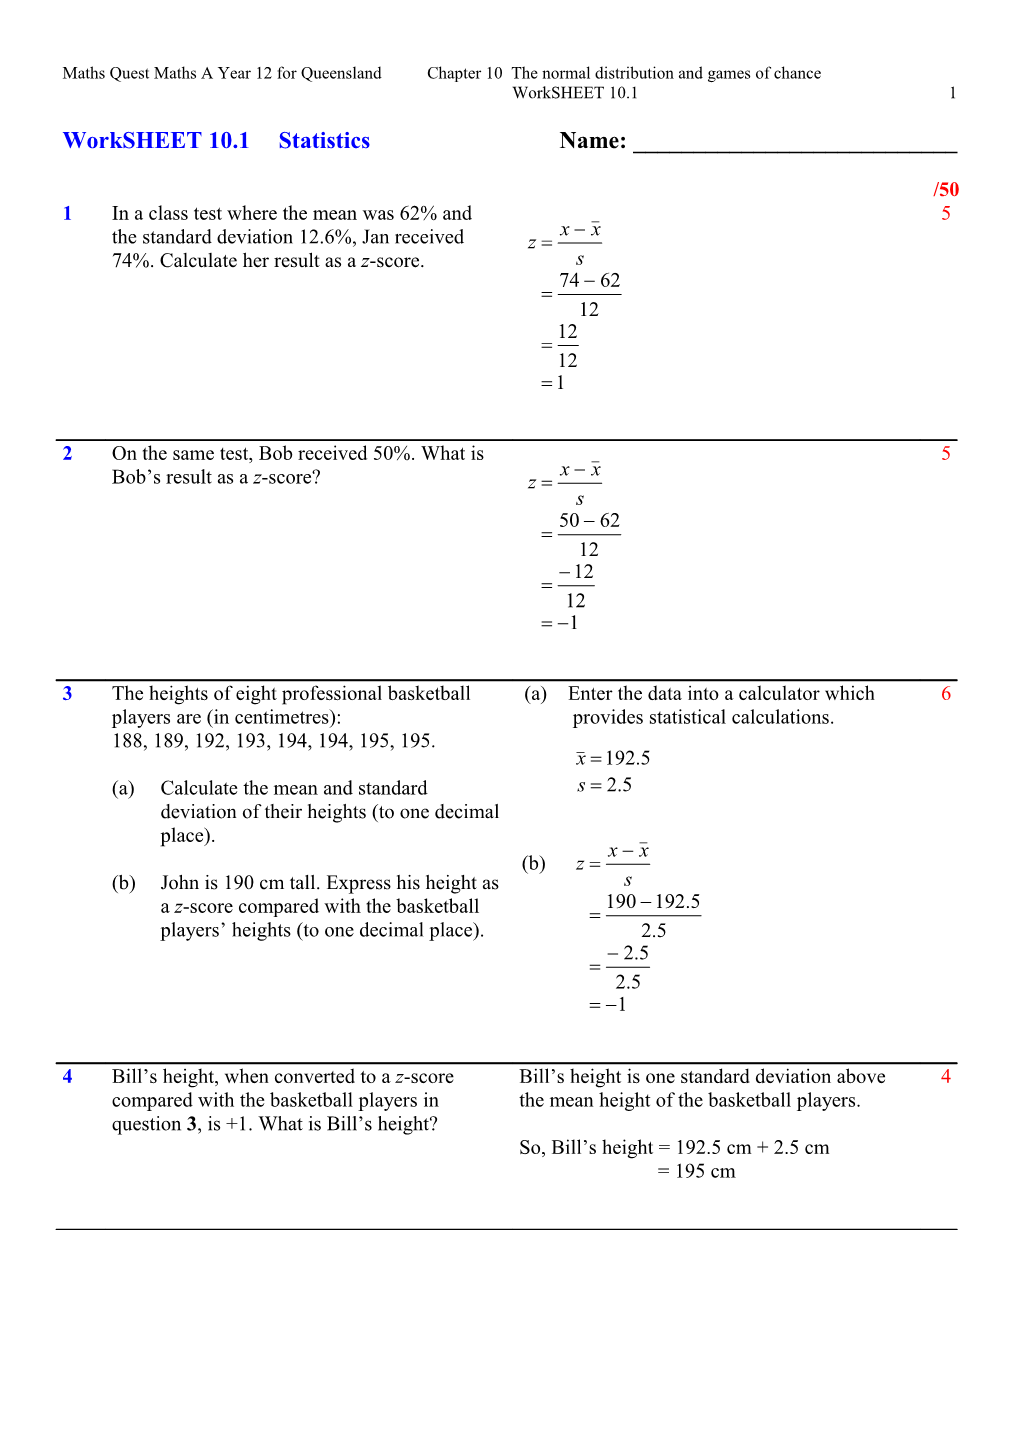 Maths Quest Maths a Year 12 for Queensland Chapter 10 the Normal Distribution and Games